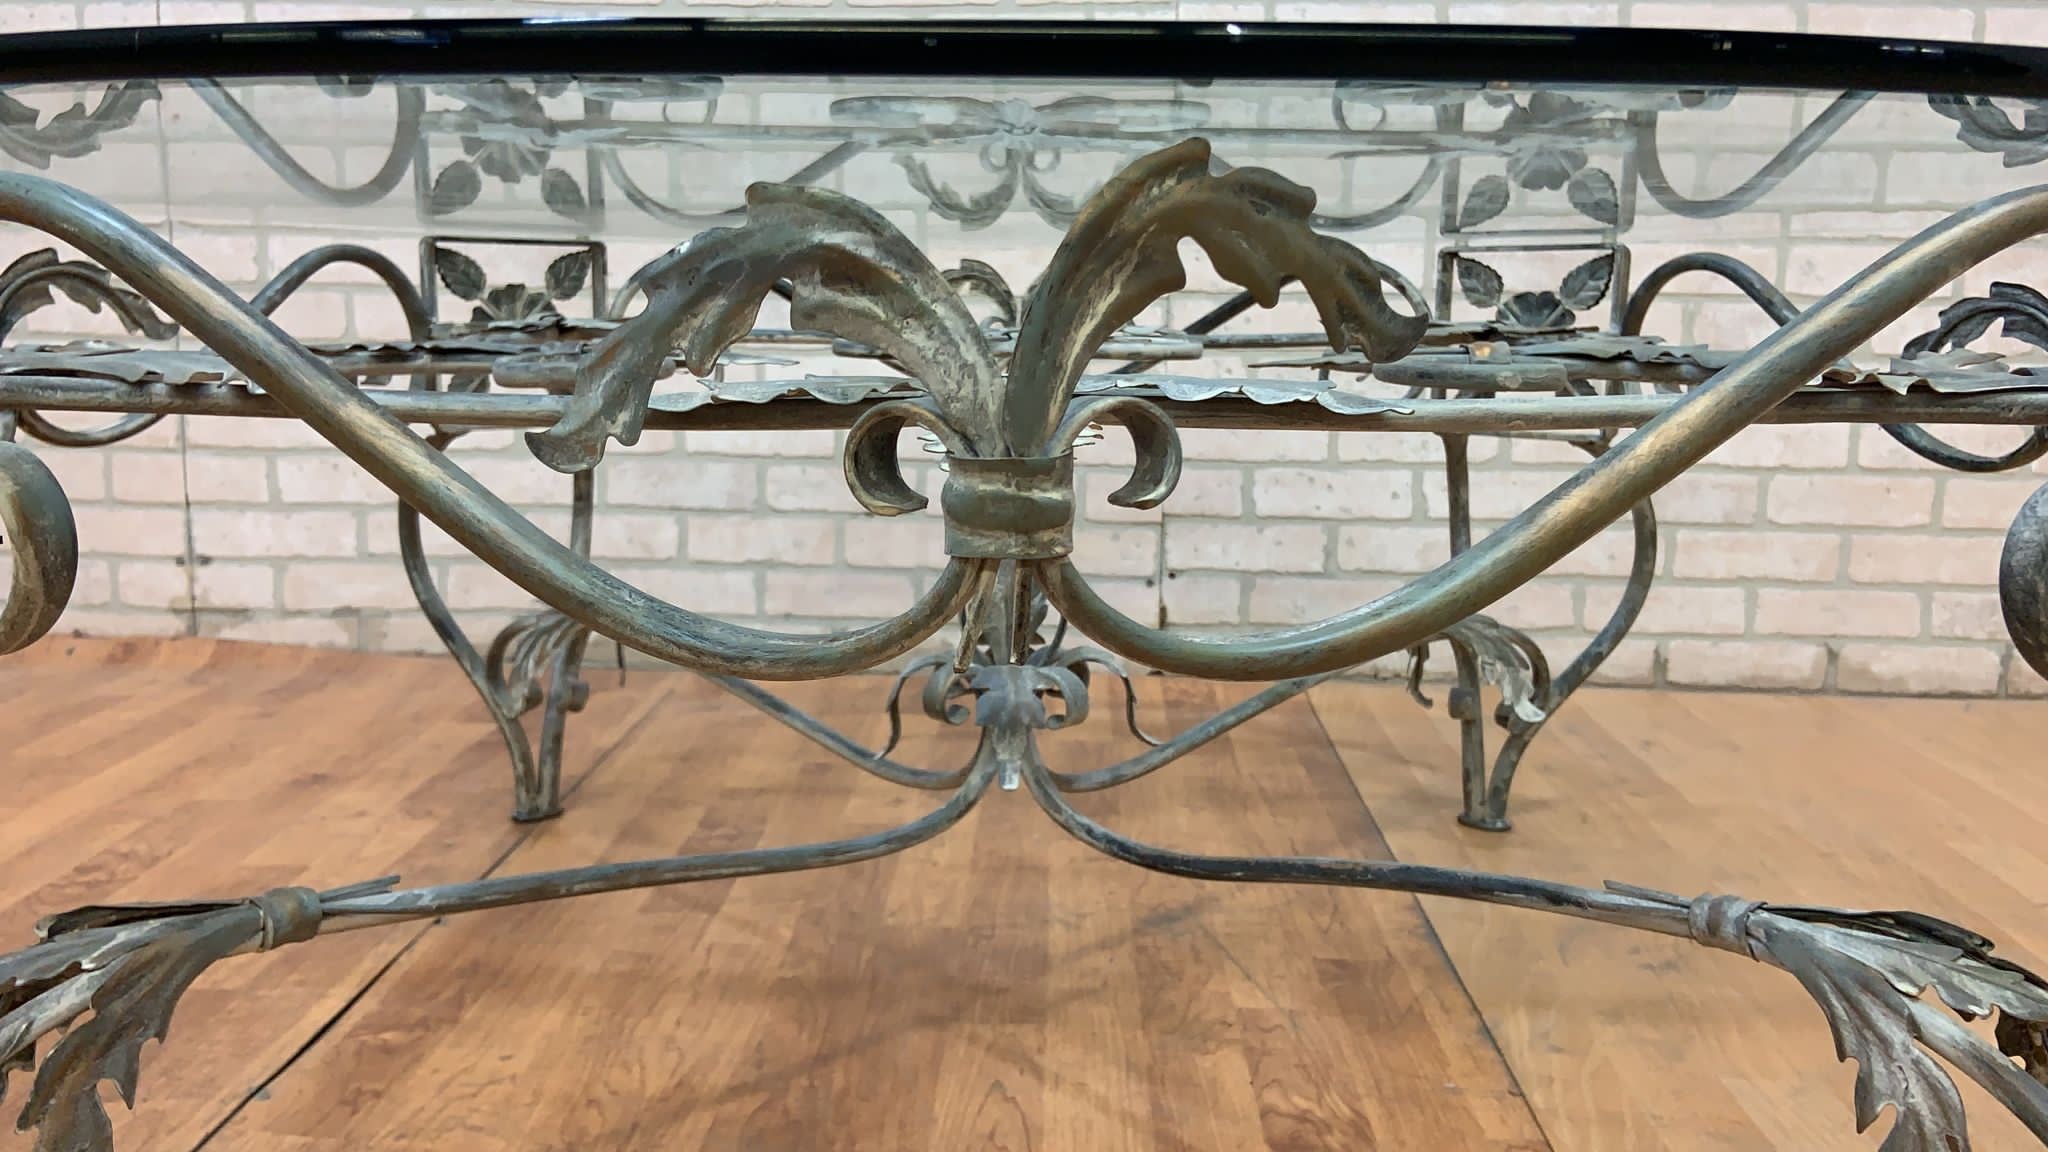 Vintage French Parisian Wrought Iron Octagonal Glass Top Coffee Table